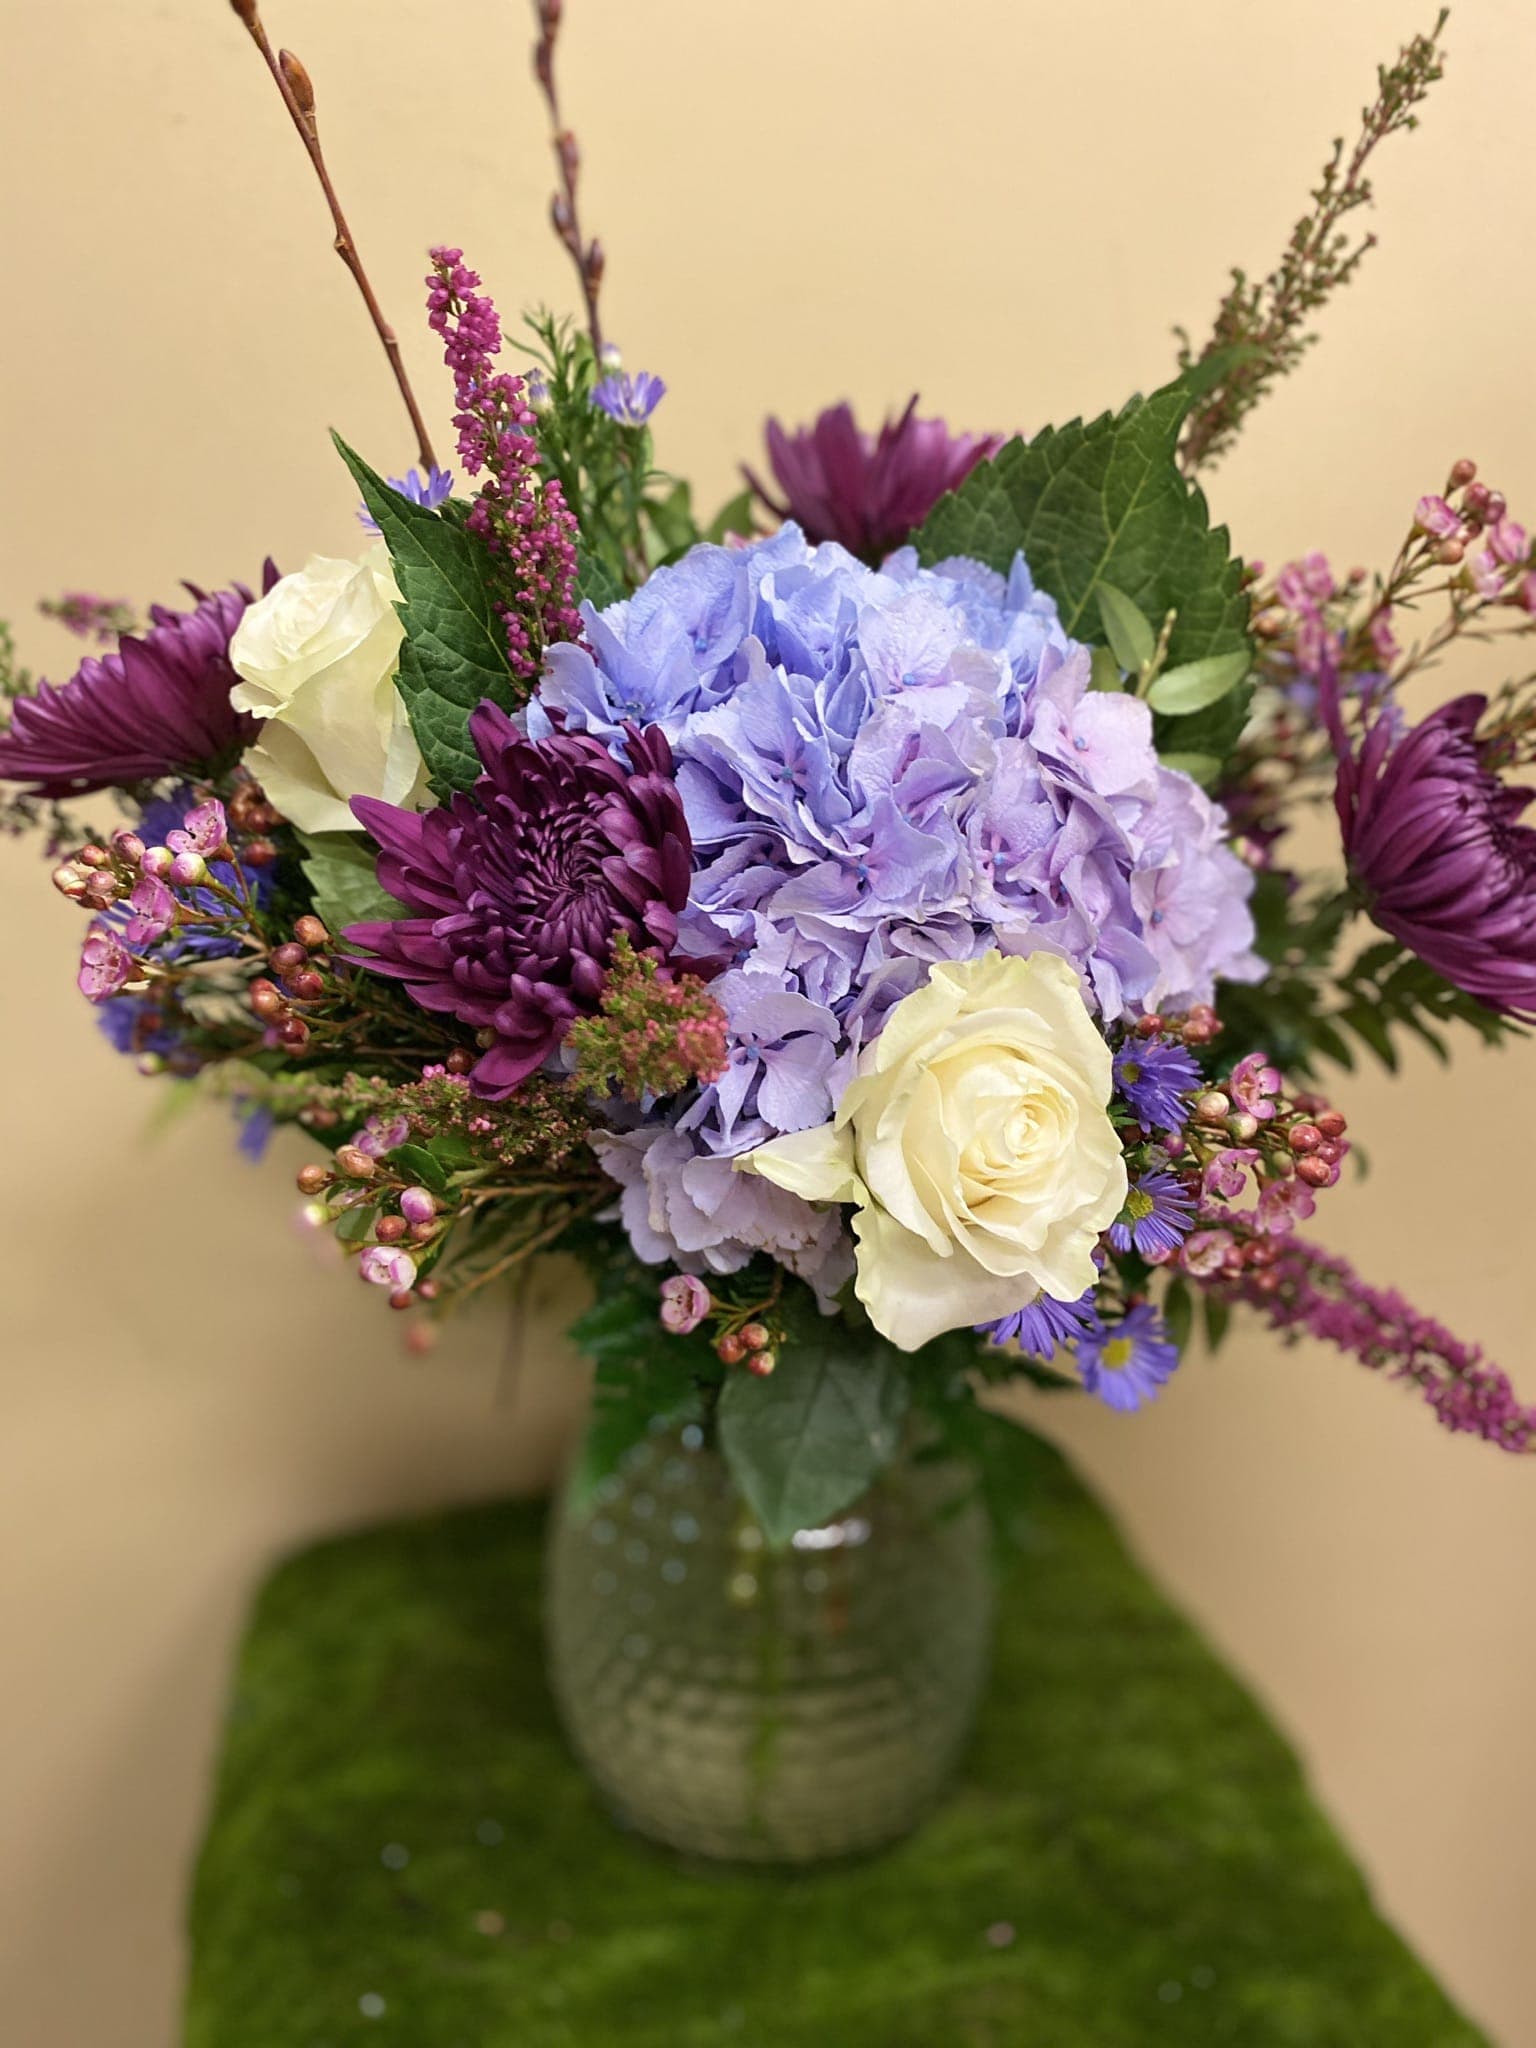 Lavender Love - Seasonal mixture of soft colors in a clear vase